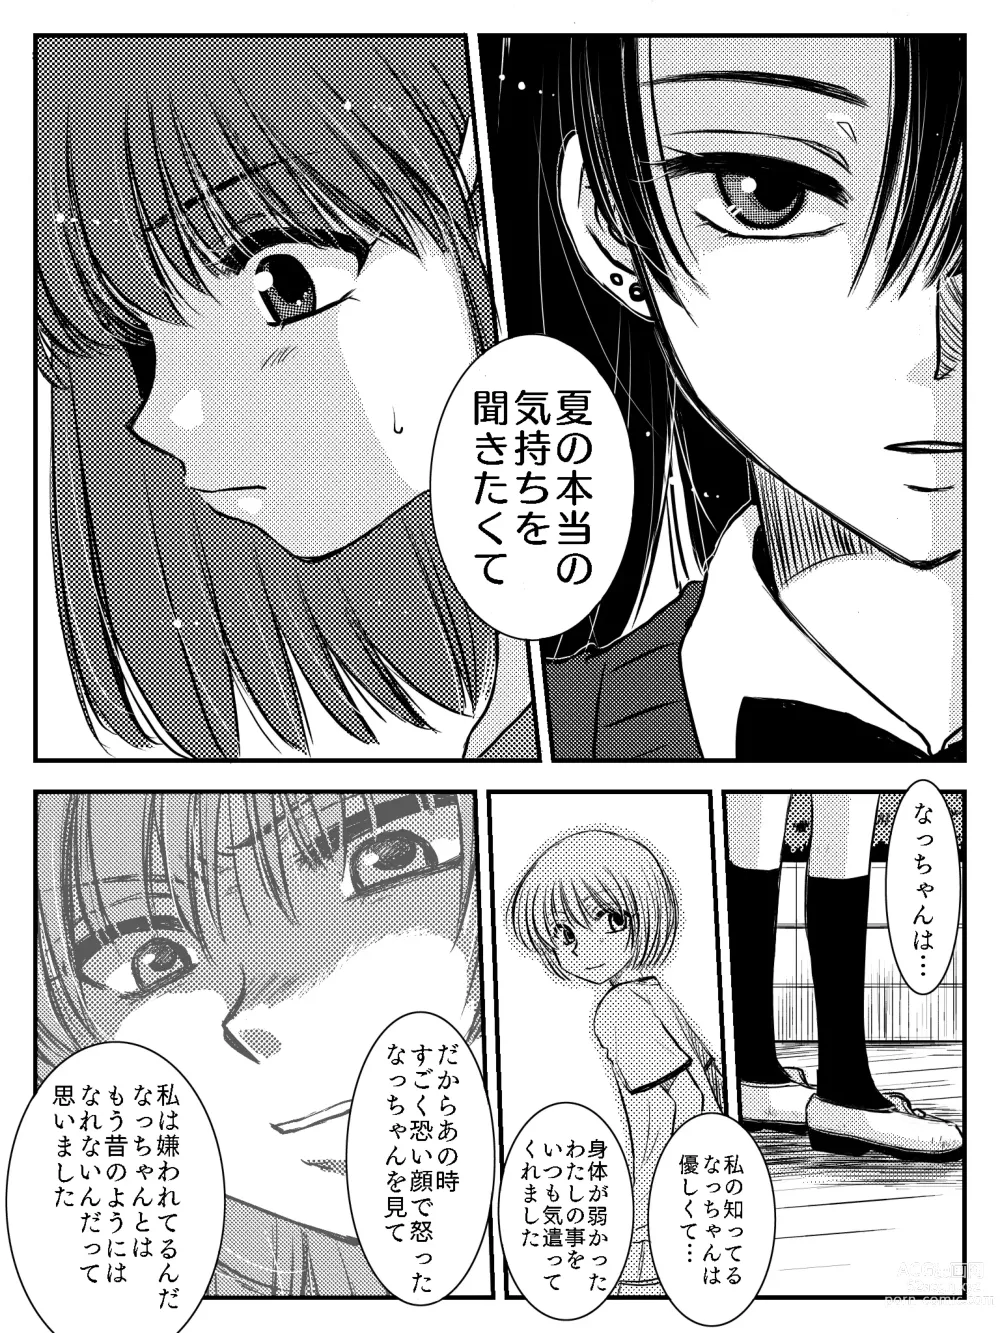 Page 16 of doujinshi LADIES NAVIGATION Episode 7 BE THE ONE